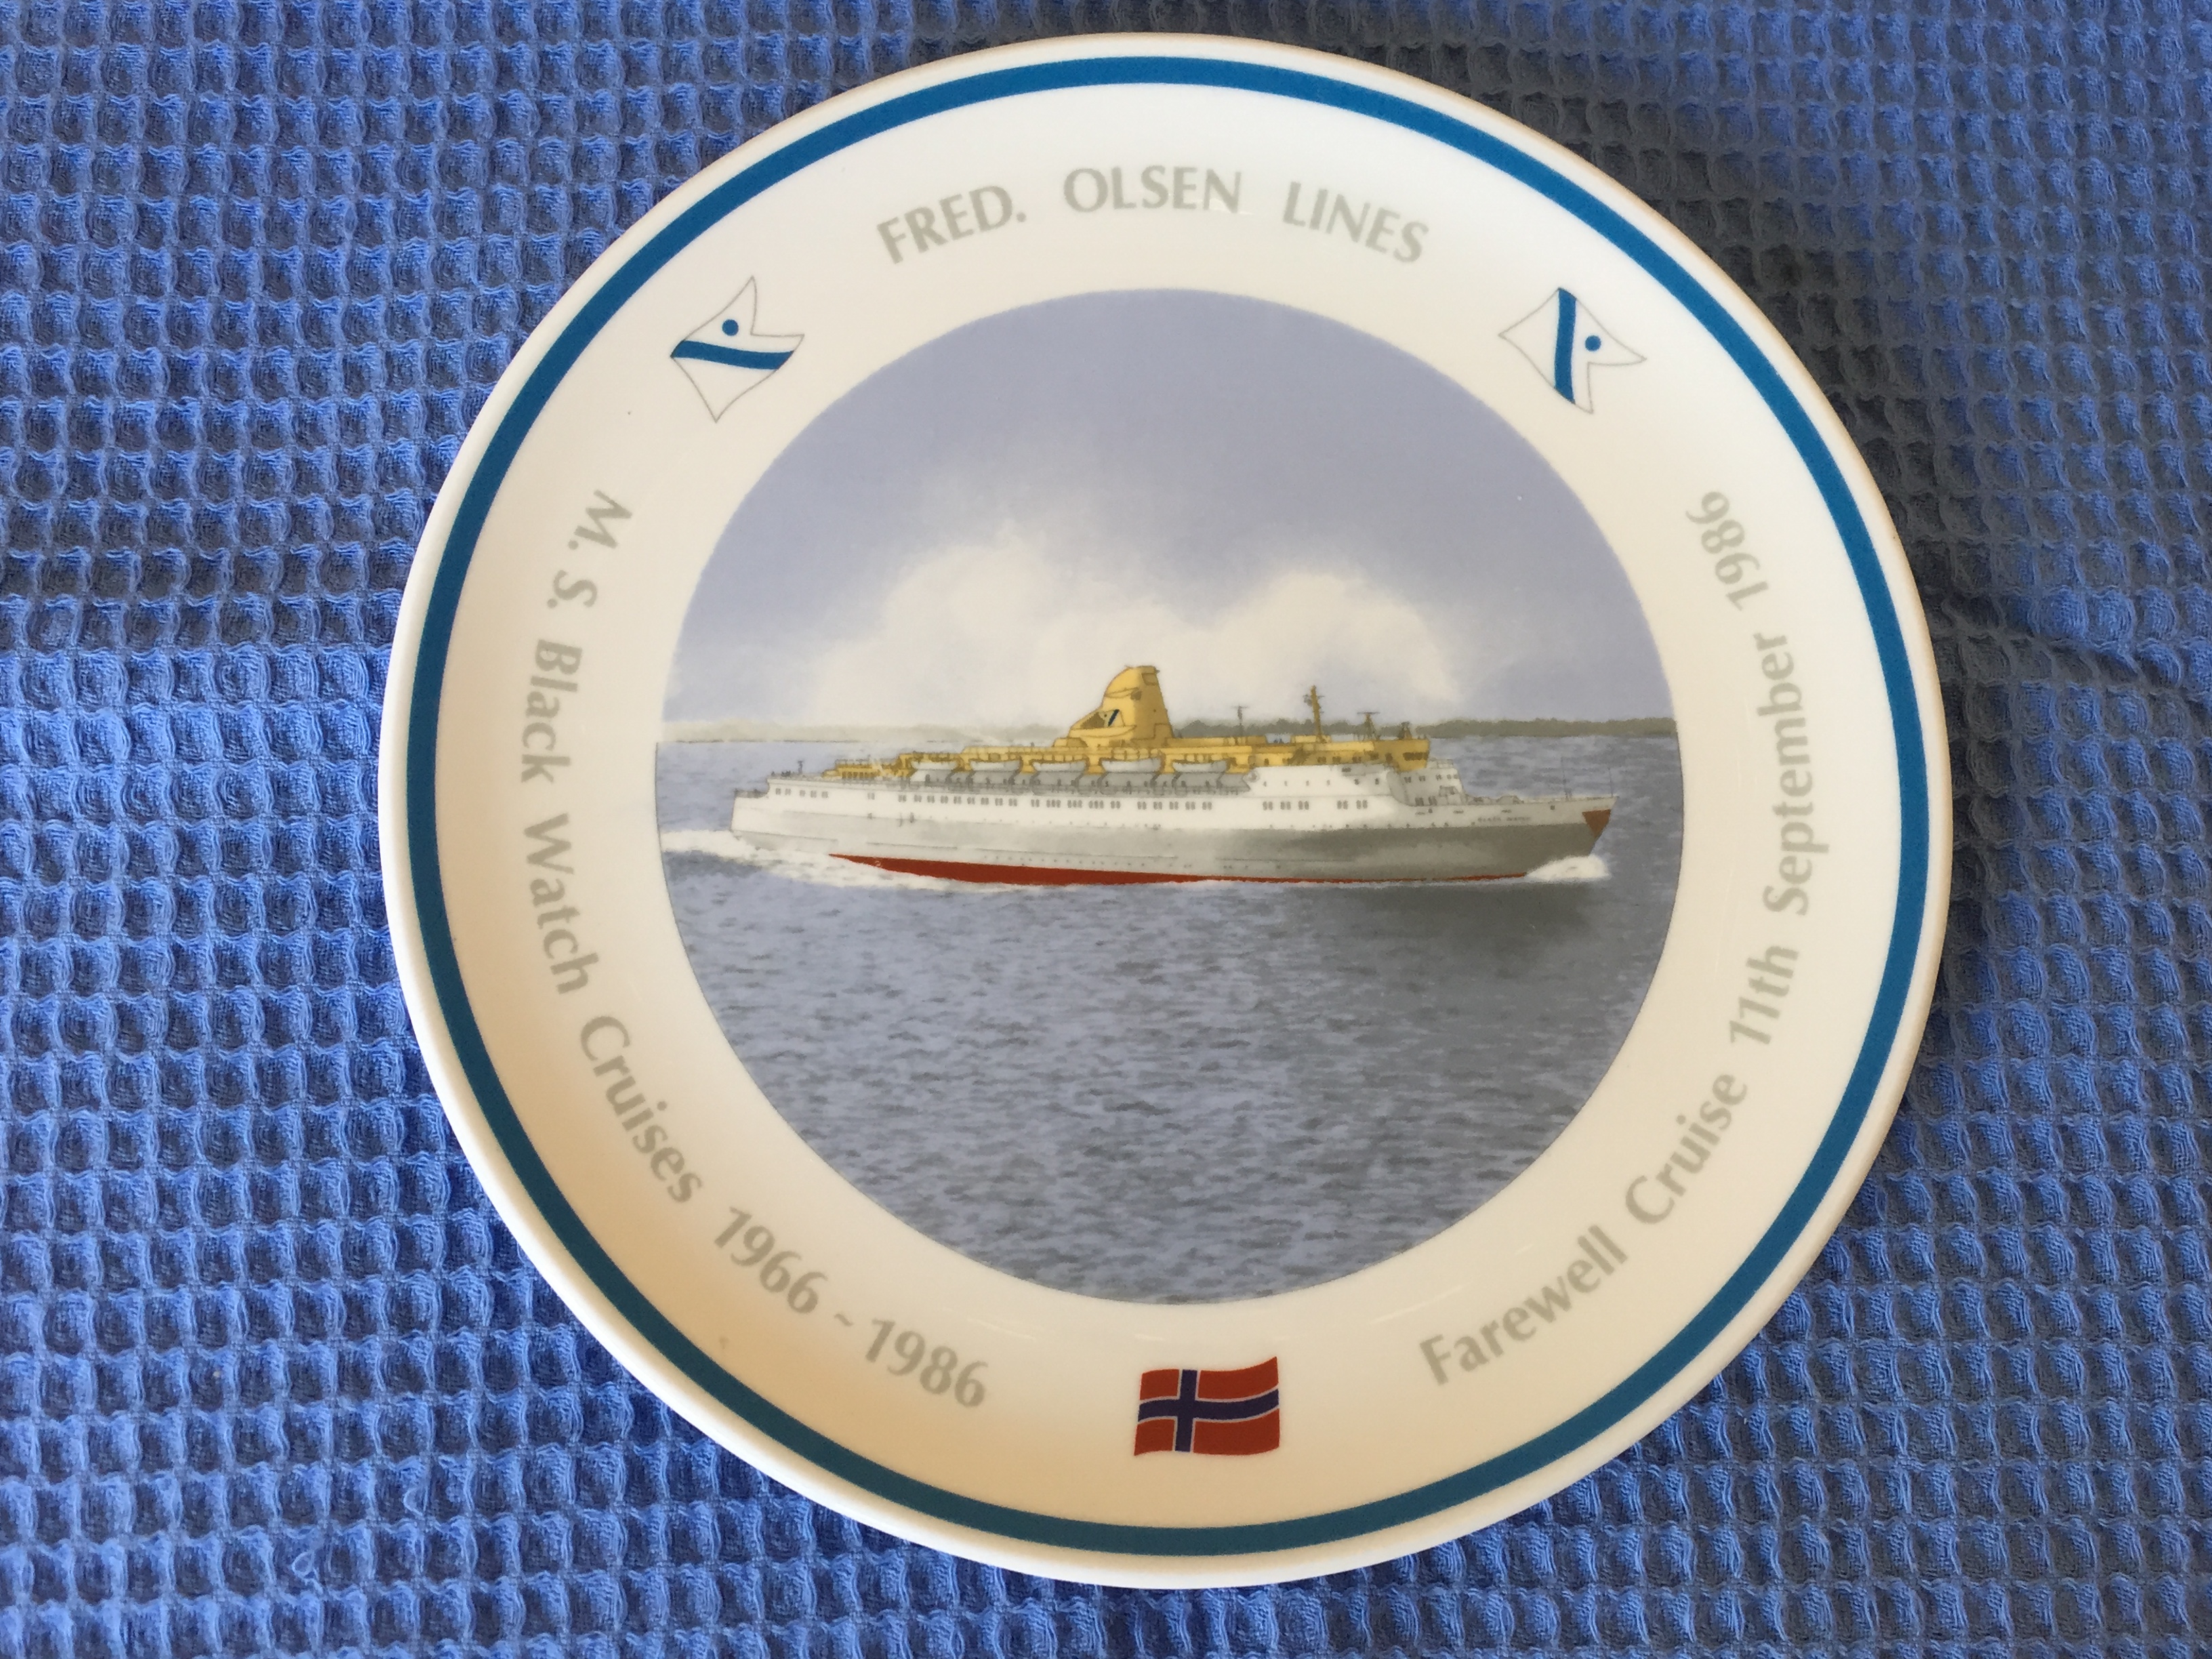 SOUVENIR FAREWELL PLATE FOR THE FRED OLSEN LINE VESSEL THE BLACK WATCH